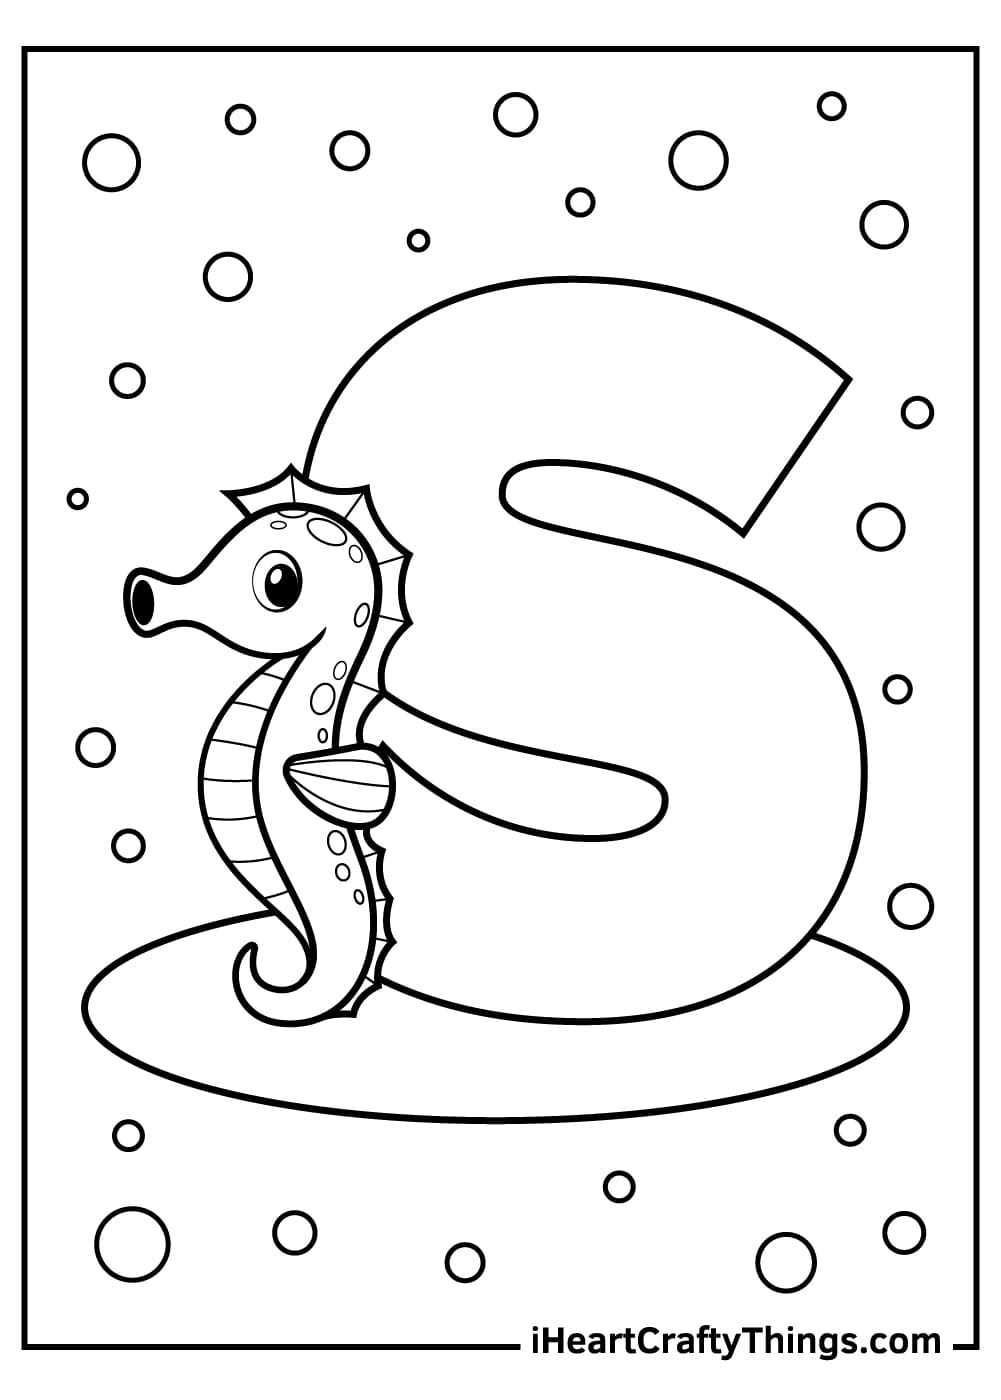 Ball Icon Black Image For Kids Coloring Page